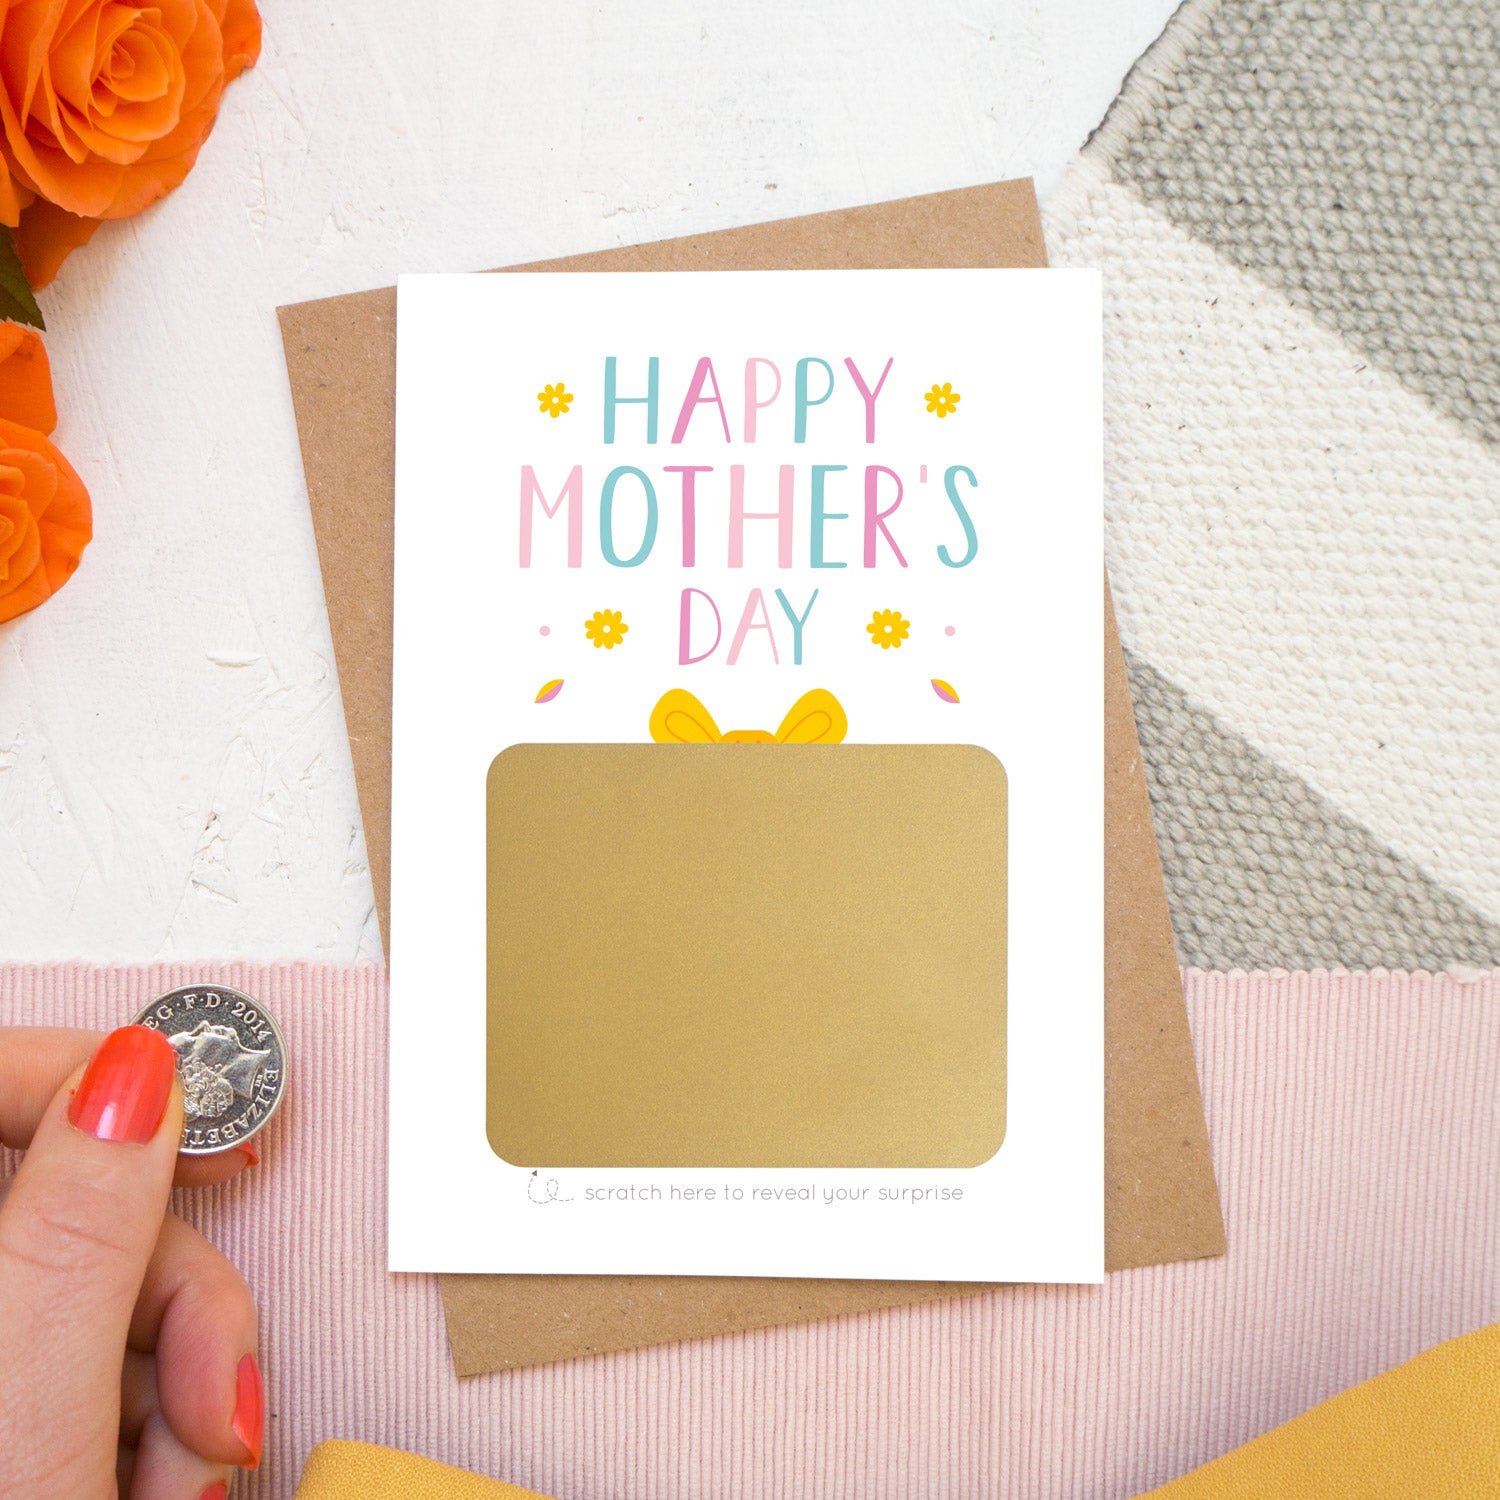 A mother’s day present scratch card lying on a kraft brown envelope on top of a white, grey and pink background with orange roses poking in the top left. The card reads ‘Happy Mother’s day’ and the gold present is yet to be scratched off. This card is in the pink and blue colour palette.